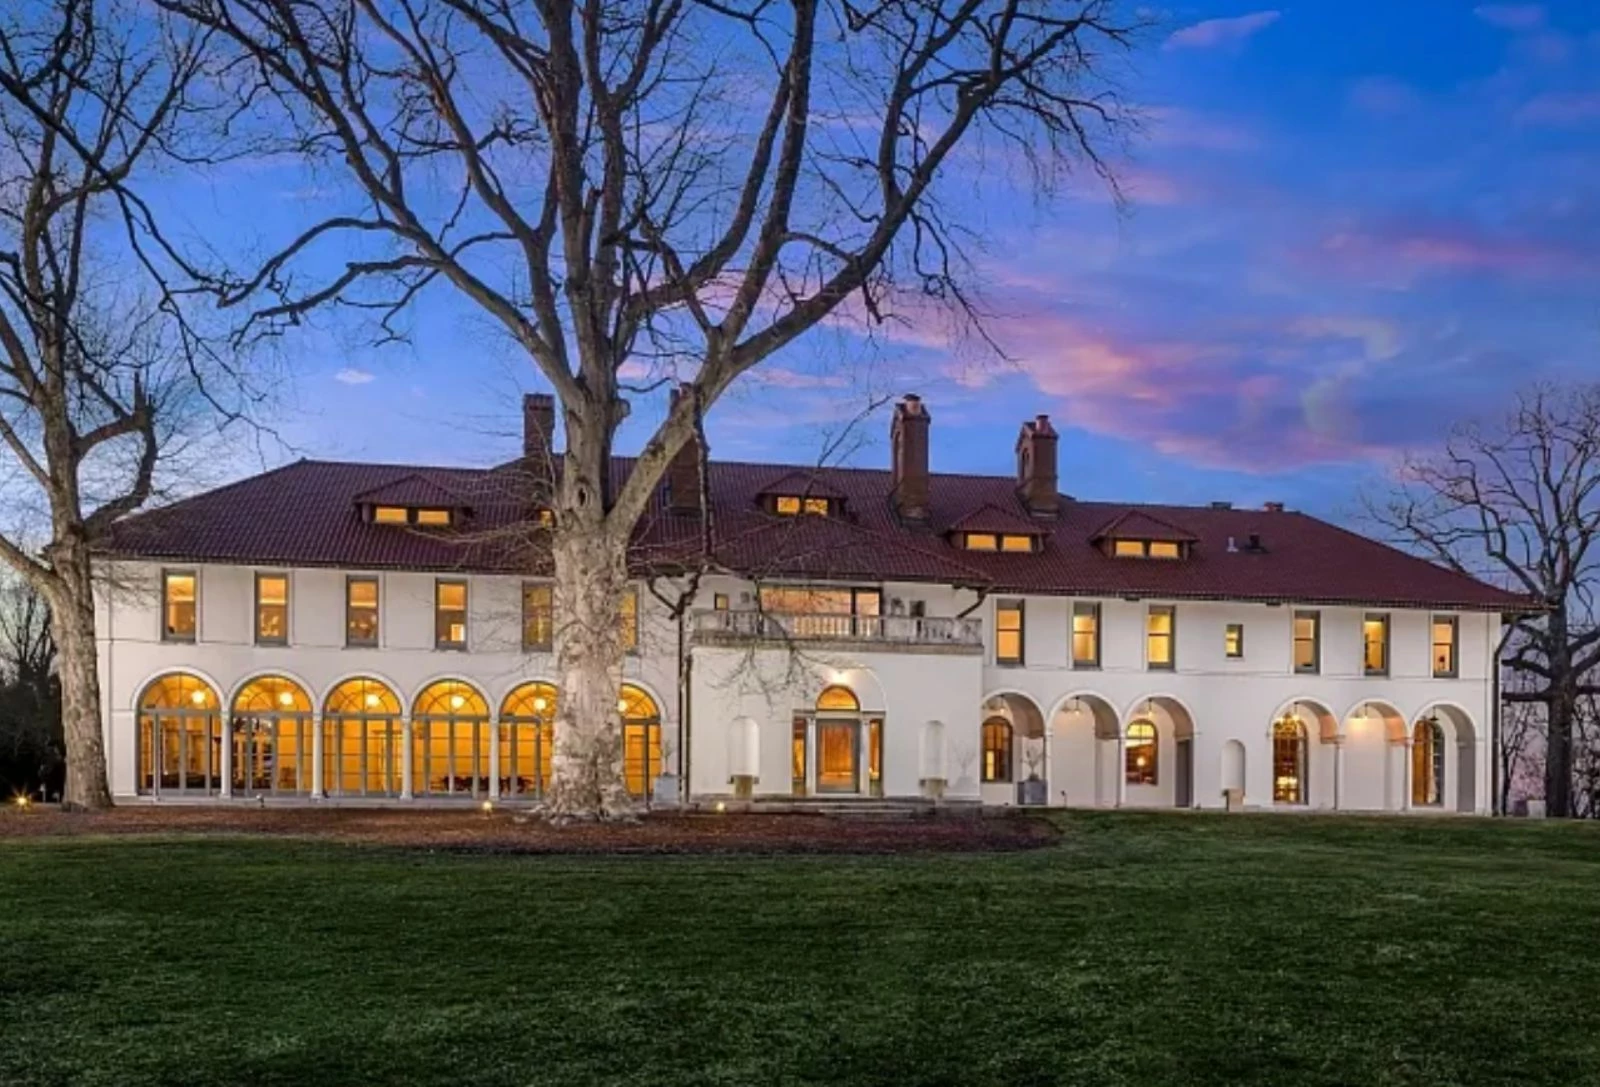 This is likely the most beautiful home for sale in NJ